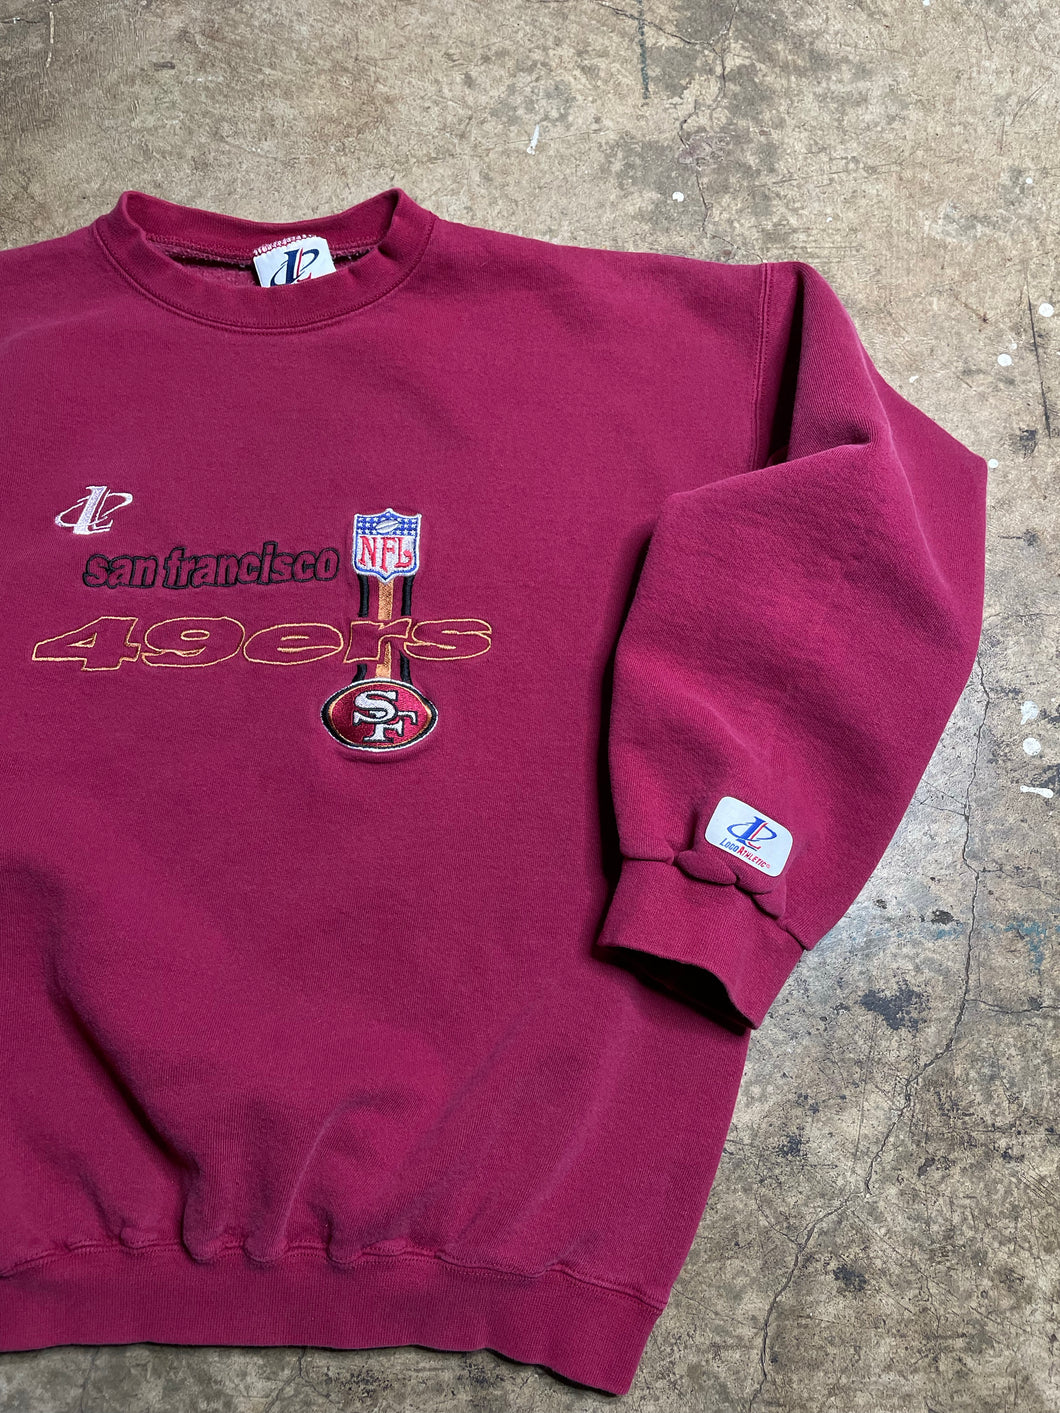 90’s 49ers Embroidered Crewneck - L/XL